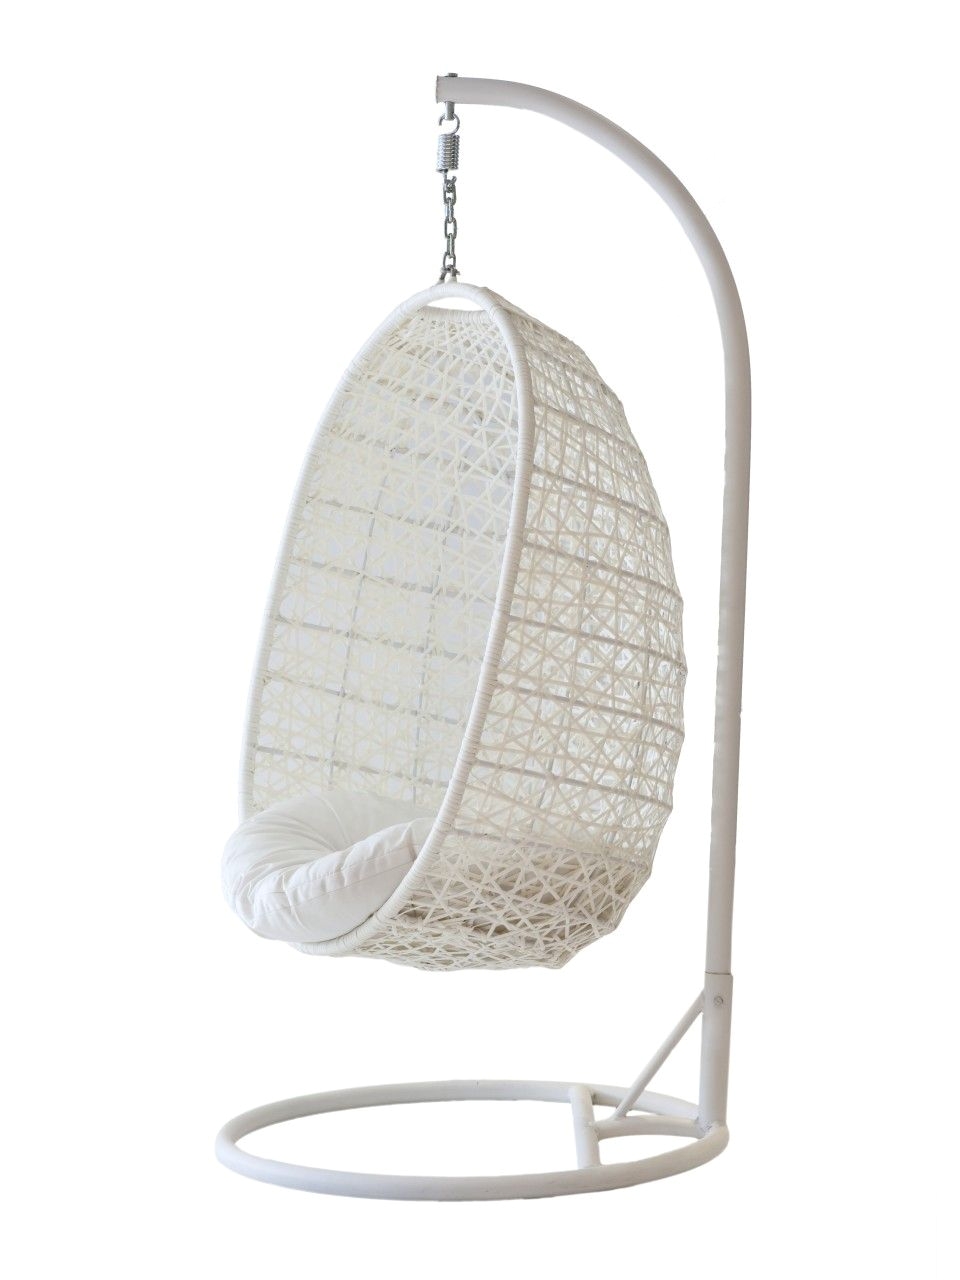 Teardrop Swing Chair with Stand Affordable Hanging Chair for Bedroom Ikea Cool Hanging Chairs for